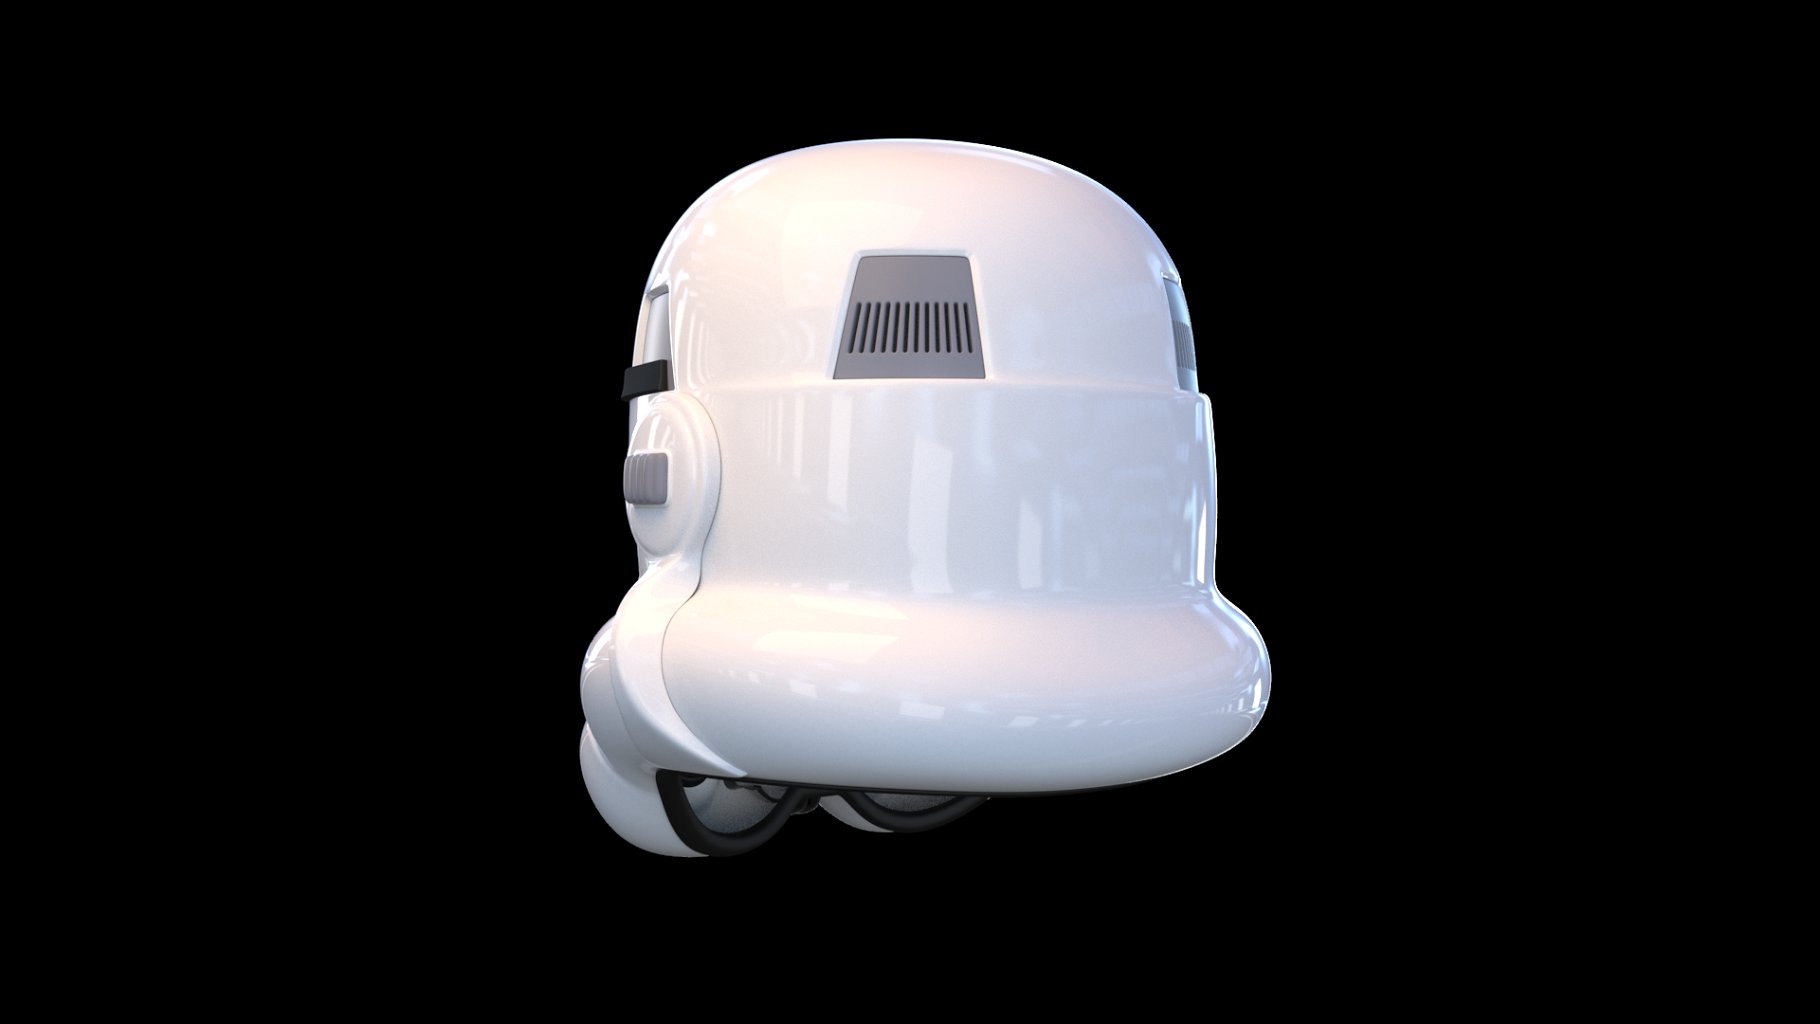 Black and white mask of a stormtrooper from Star Wars.